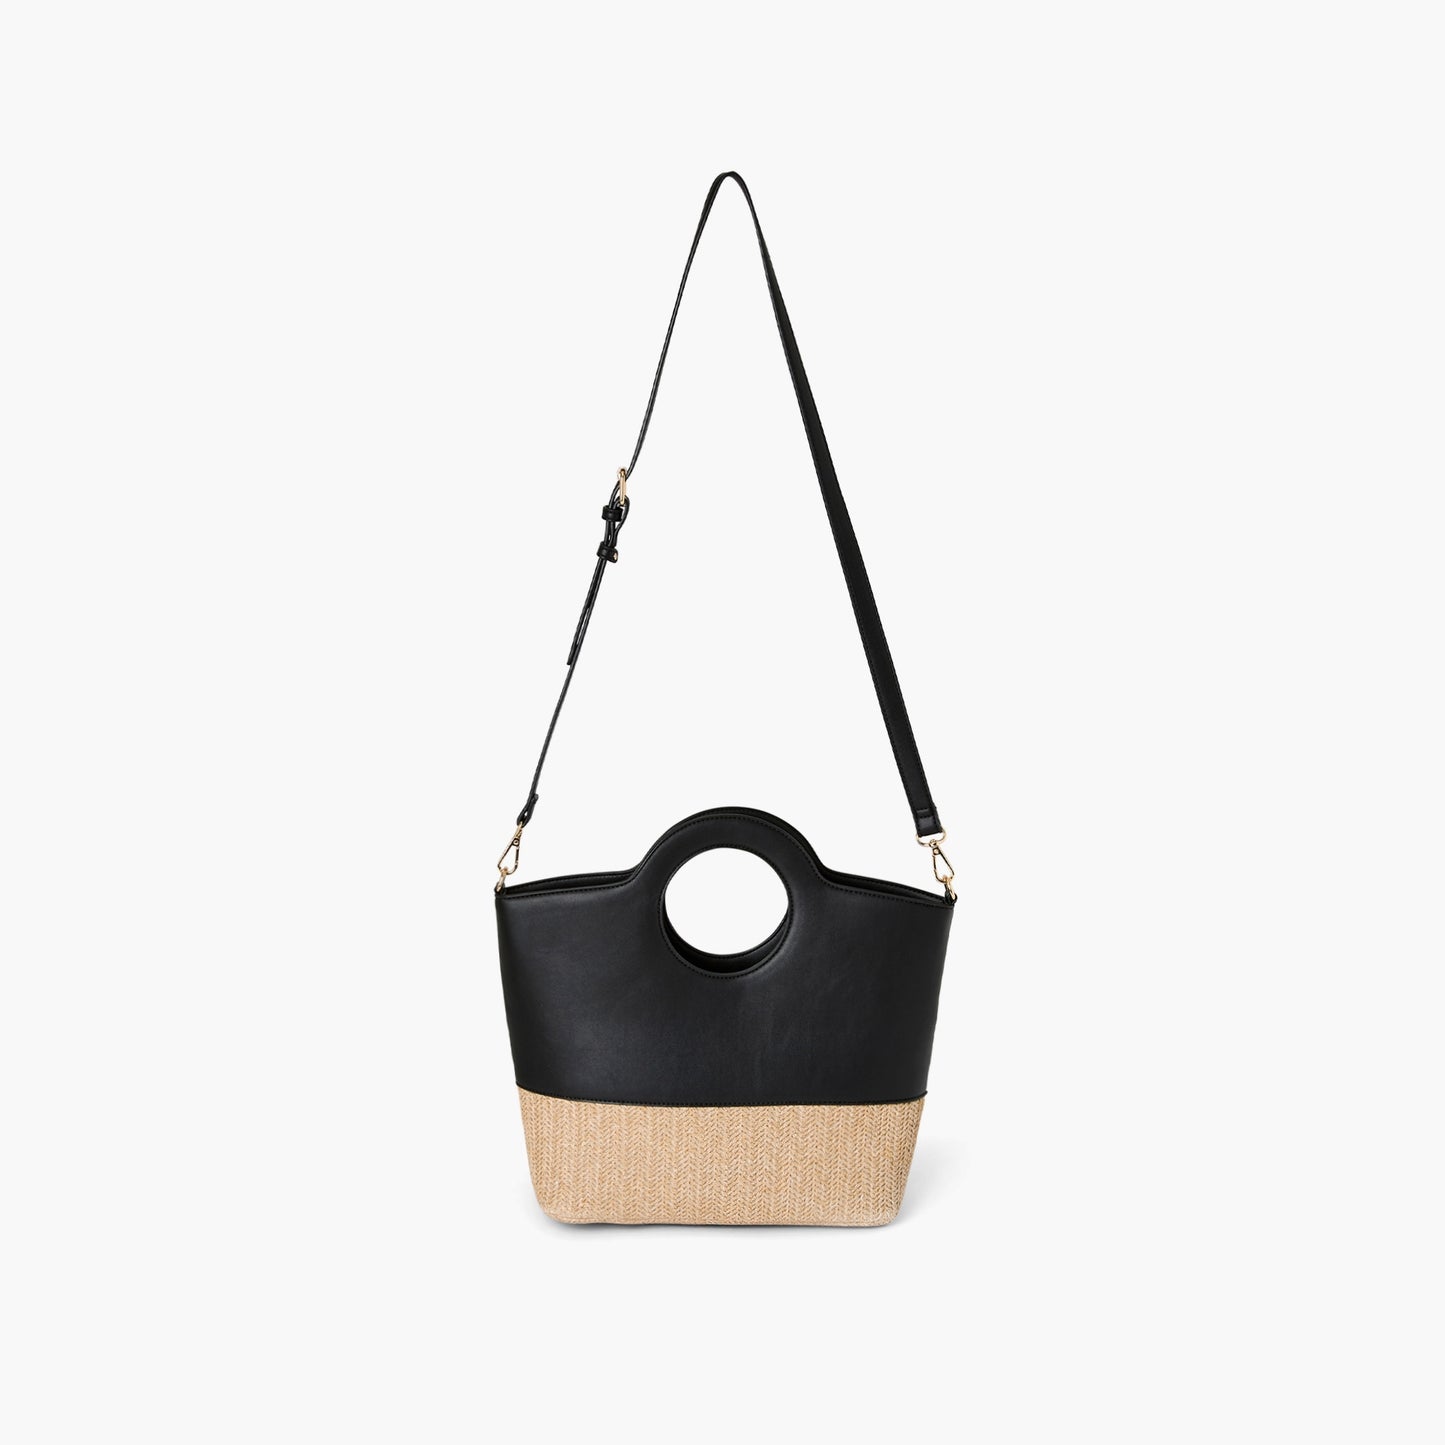 Vegan Leather And Straw Tote Purse